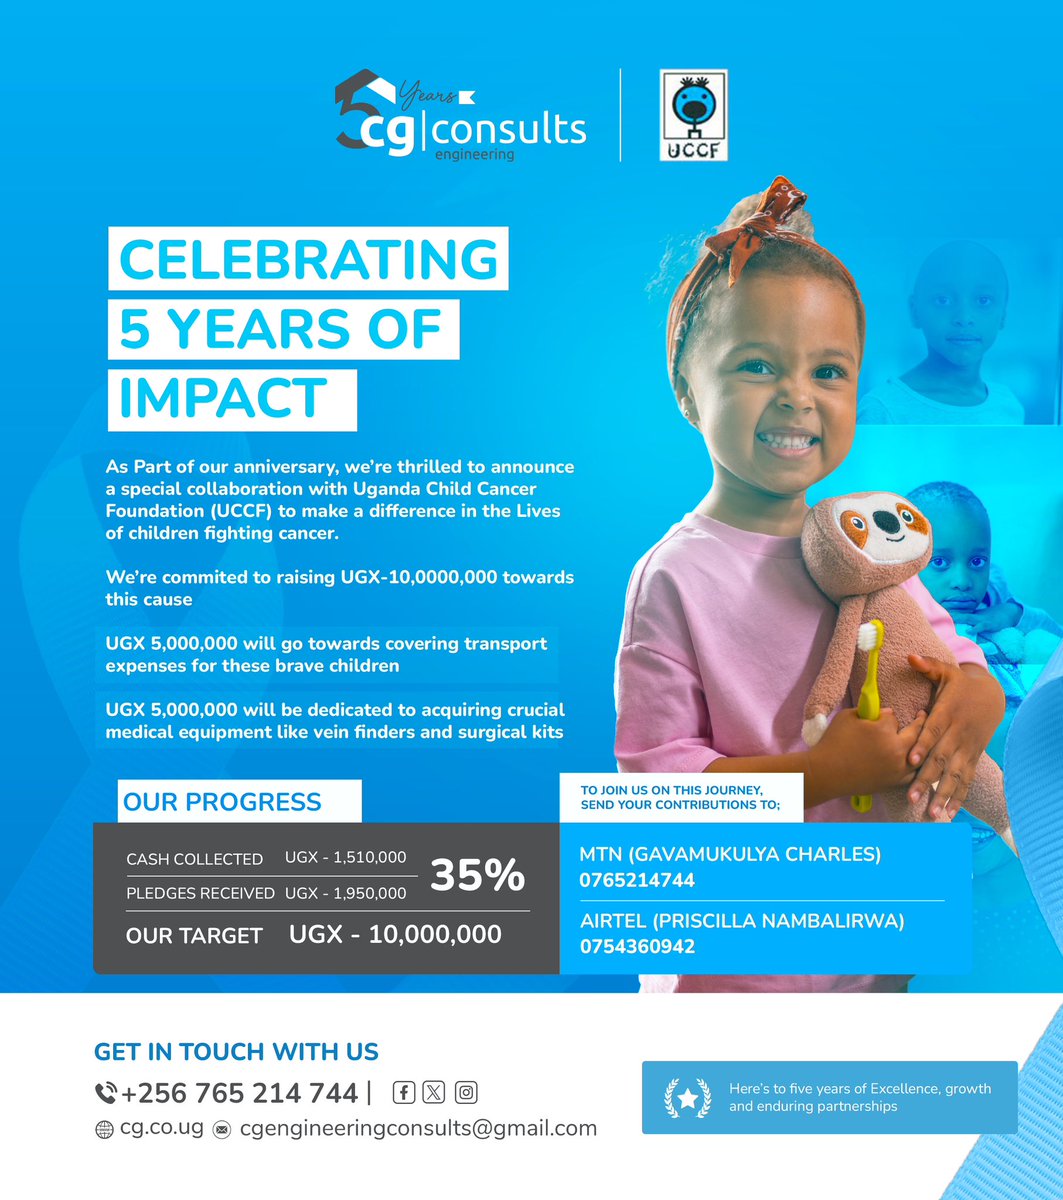 Fundraising Update : Our fundraiser for the brave children fighting cancer has so far raised UGX 1,710,000 in cash and UGX 1,750,000 in actual pledges. Let’s keep donating and fundraising towards this impactful cause. #CGAt5